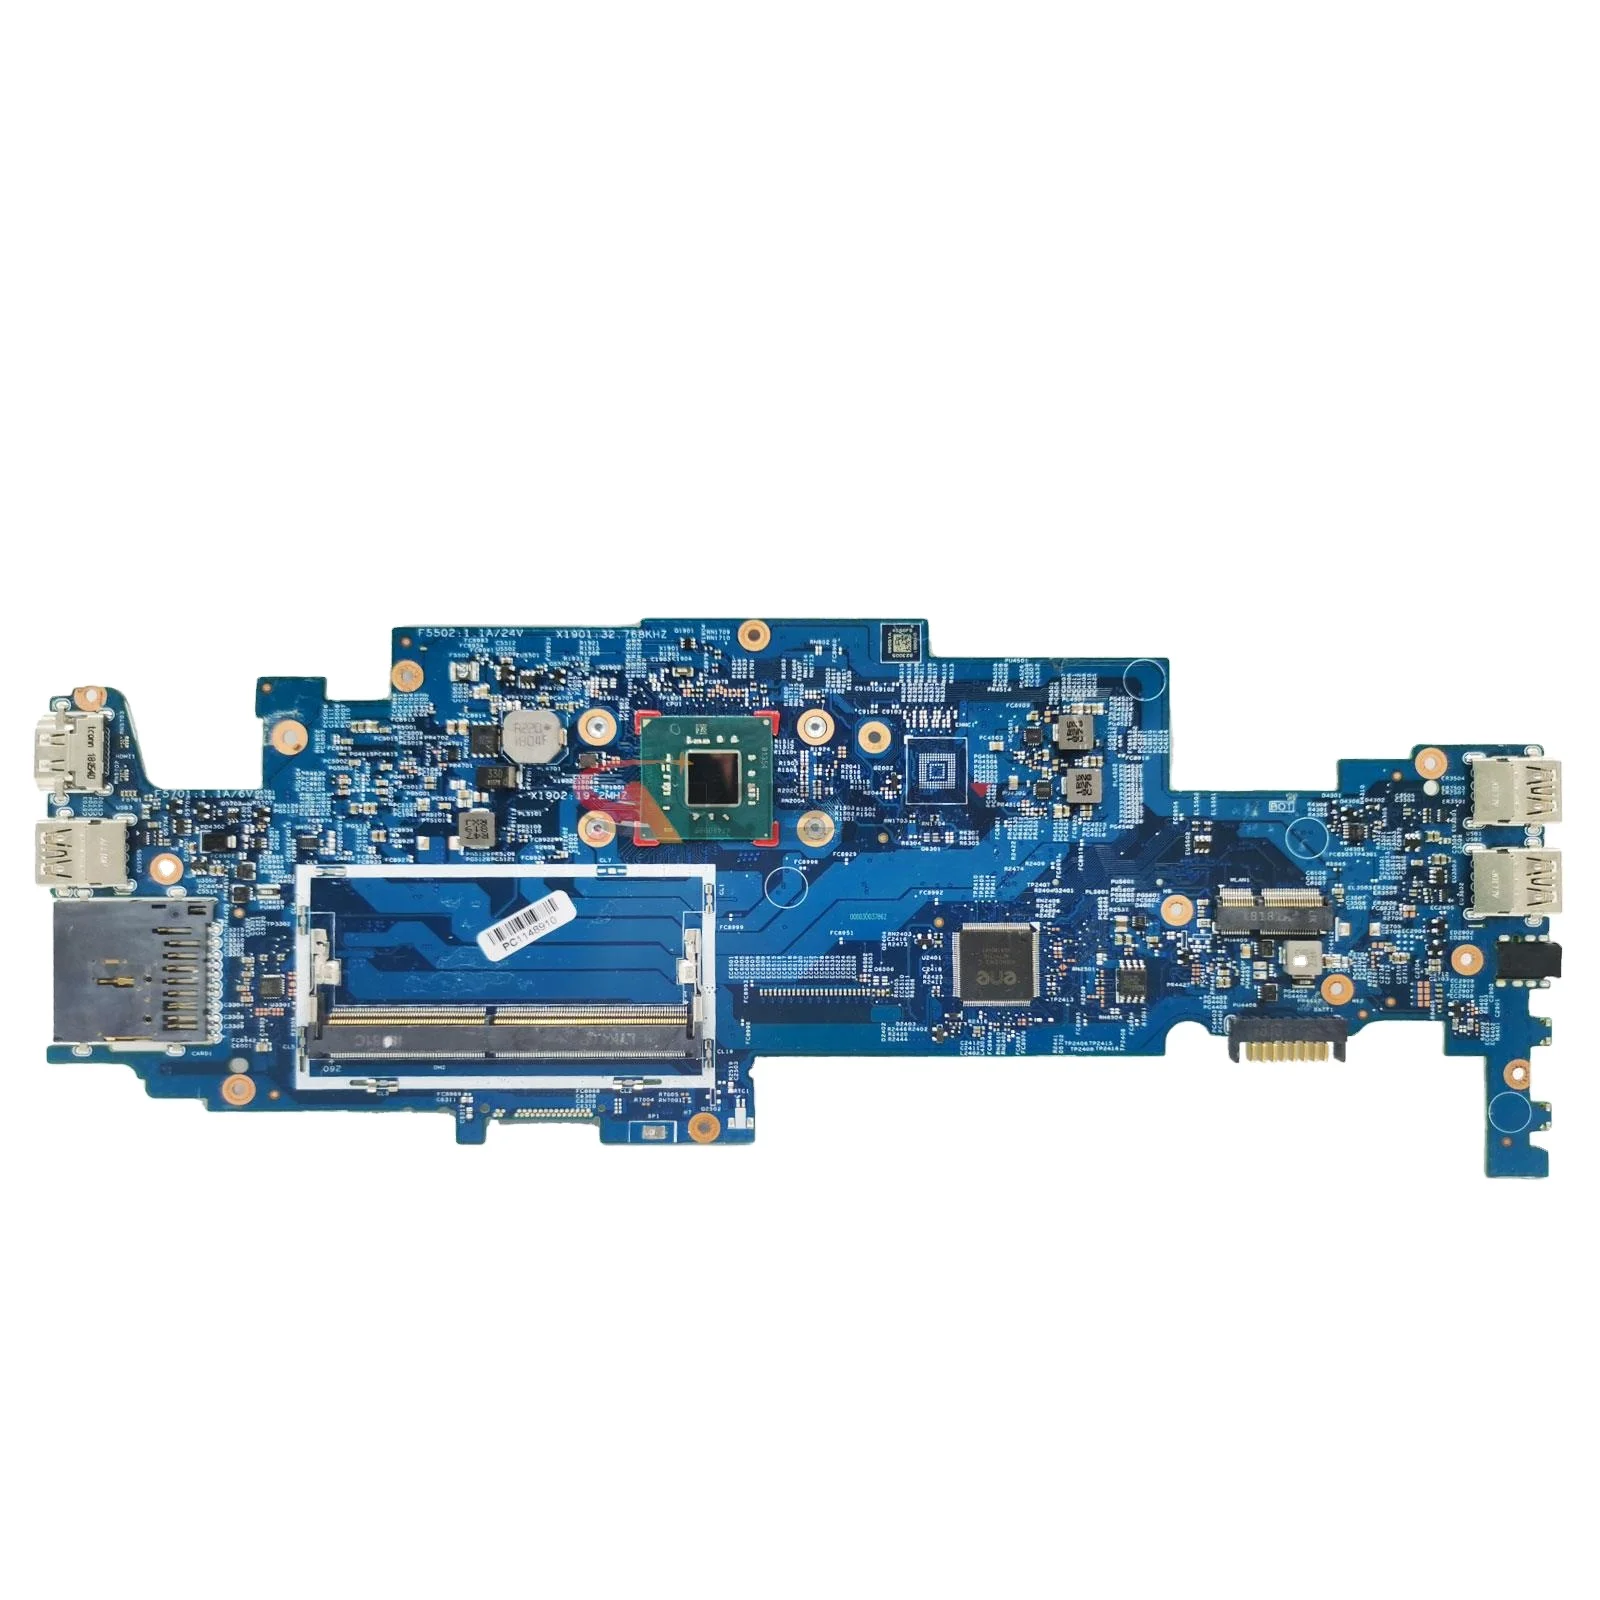 

L20761-601 L20761-001 L29043-601 For HP Pavilion X360 11-AD 11M-AD Laptop Motherboard With N5000 CPU 17928-1 448.0F503.0011 DDR4